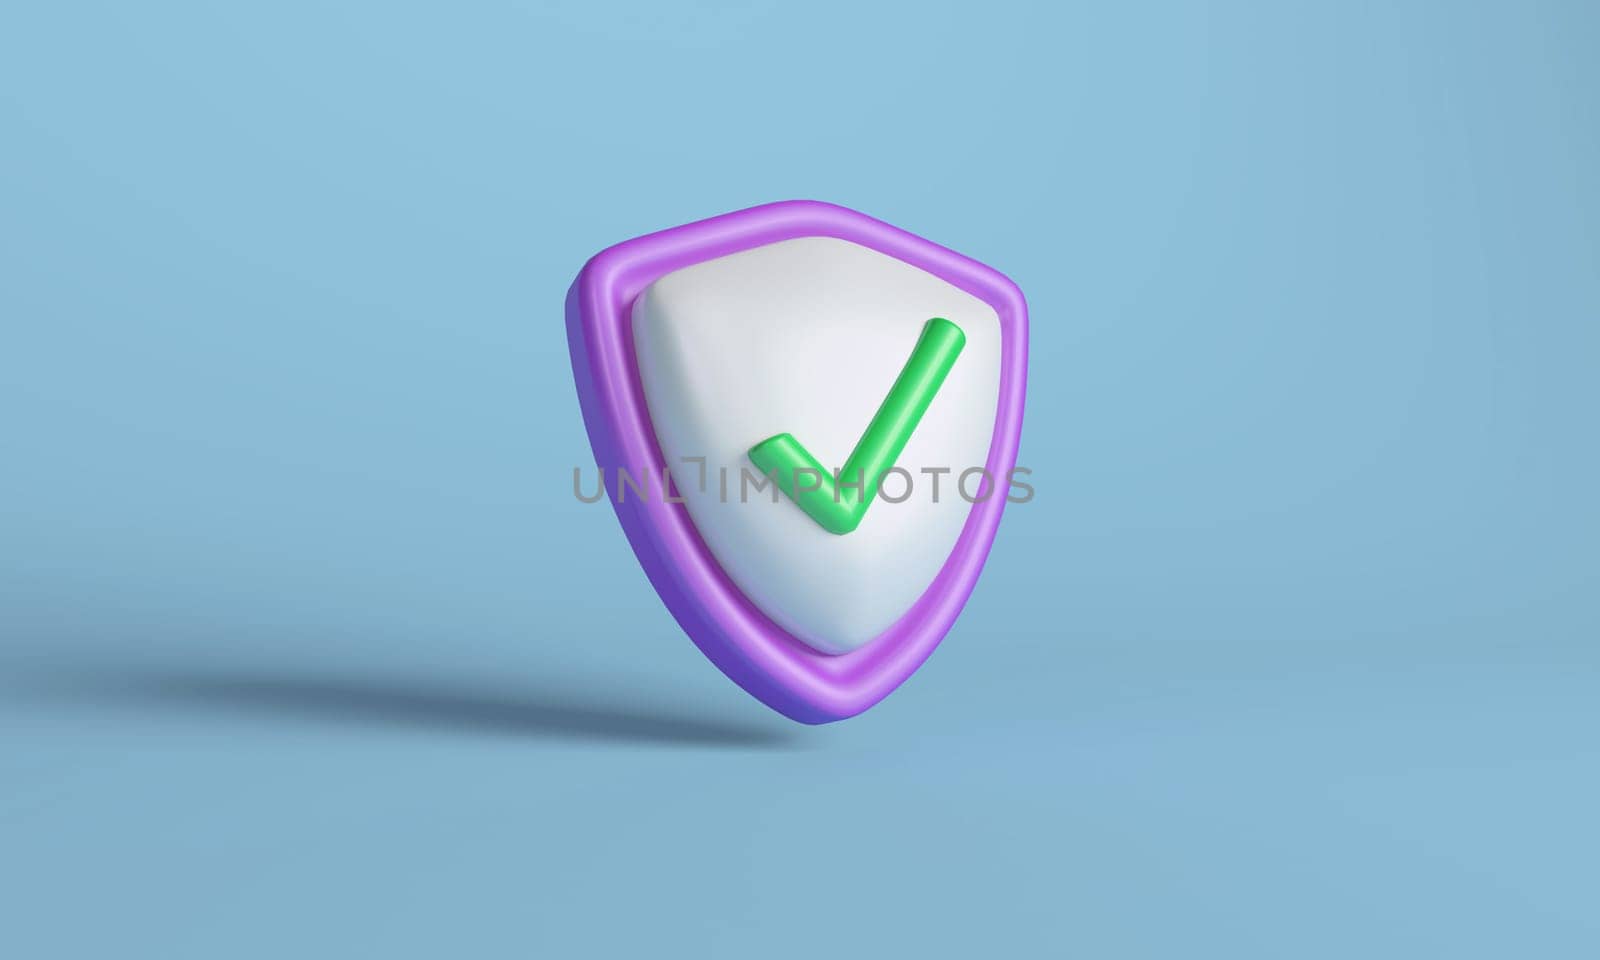 3D illustration of a security shield featuring a prominent green check mark, Concept protection and approval.